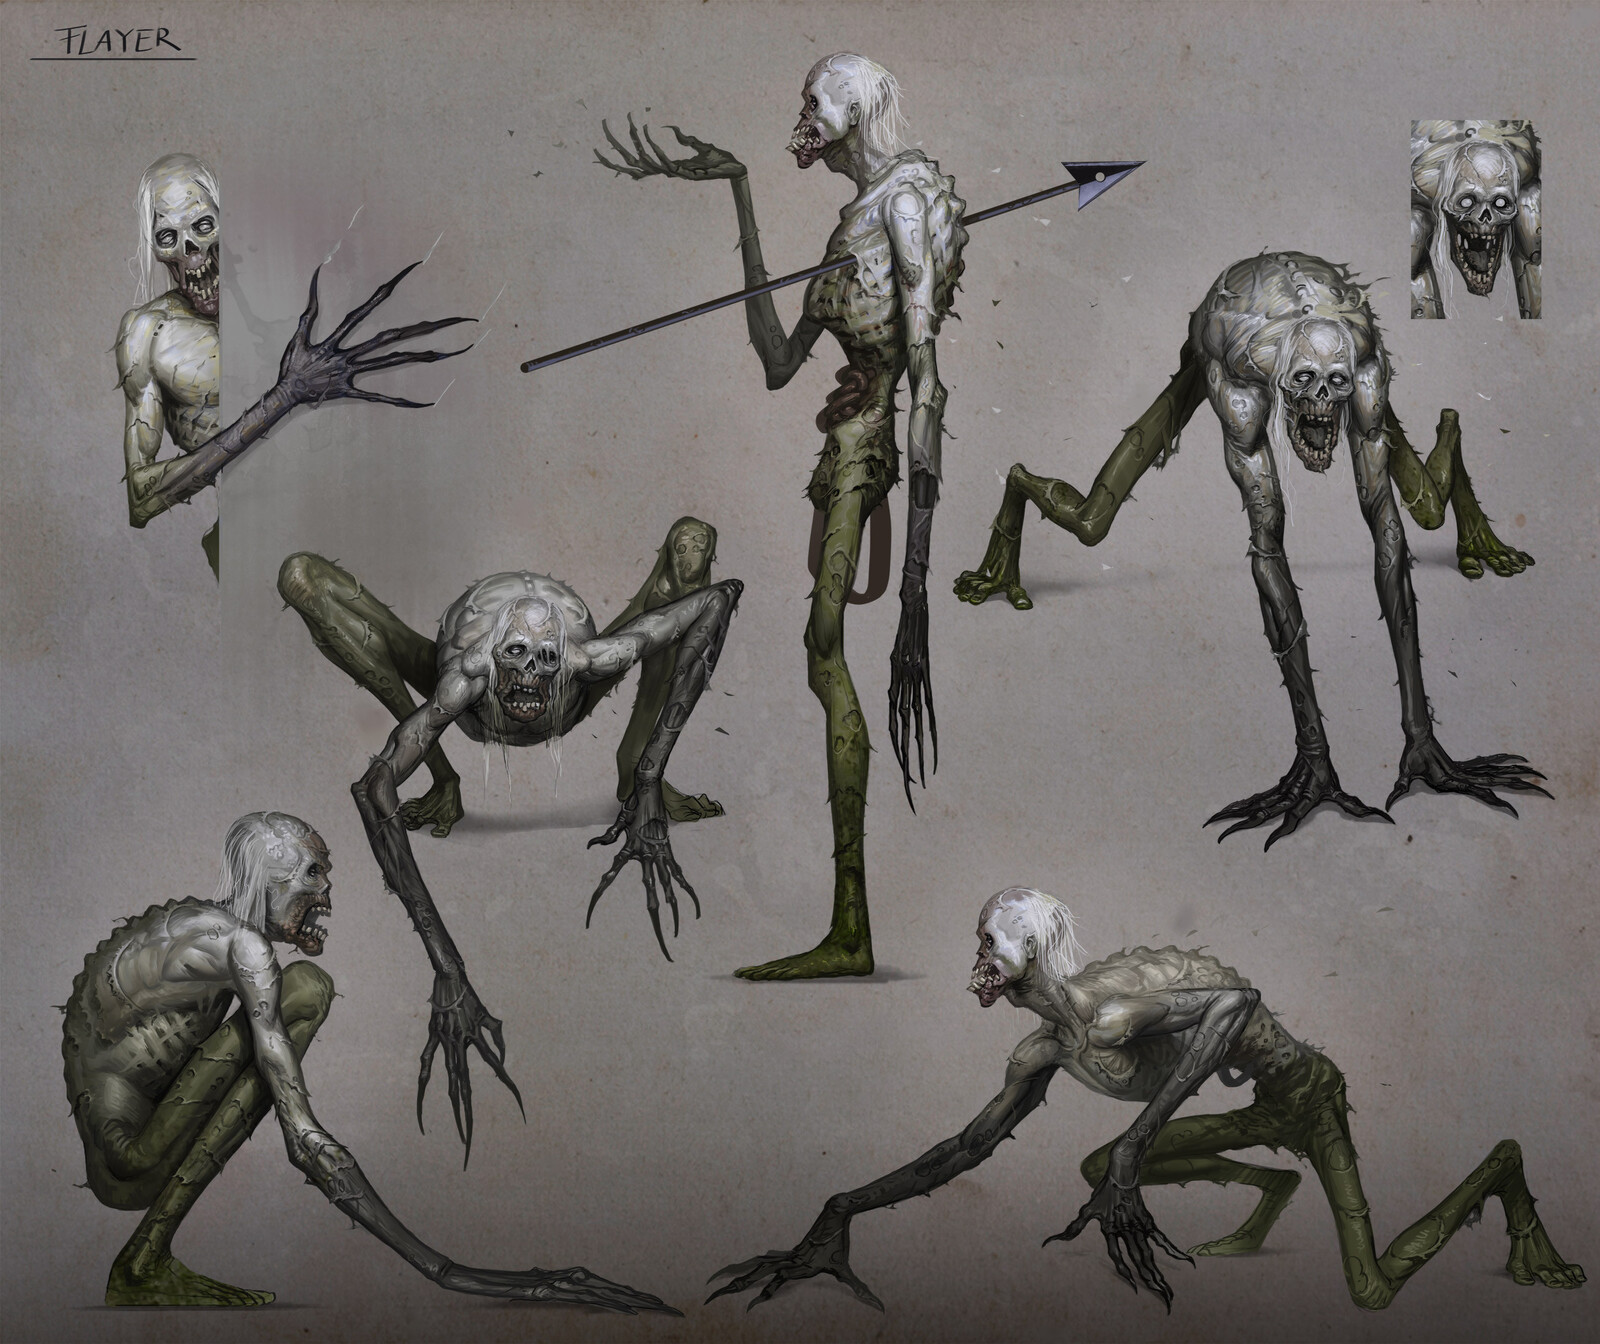 Zombie - Flayer Concepts